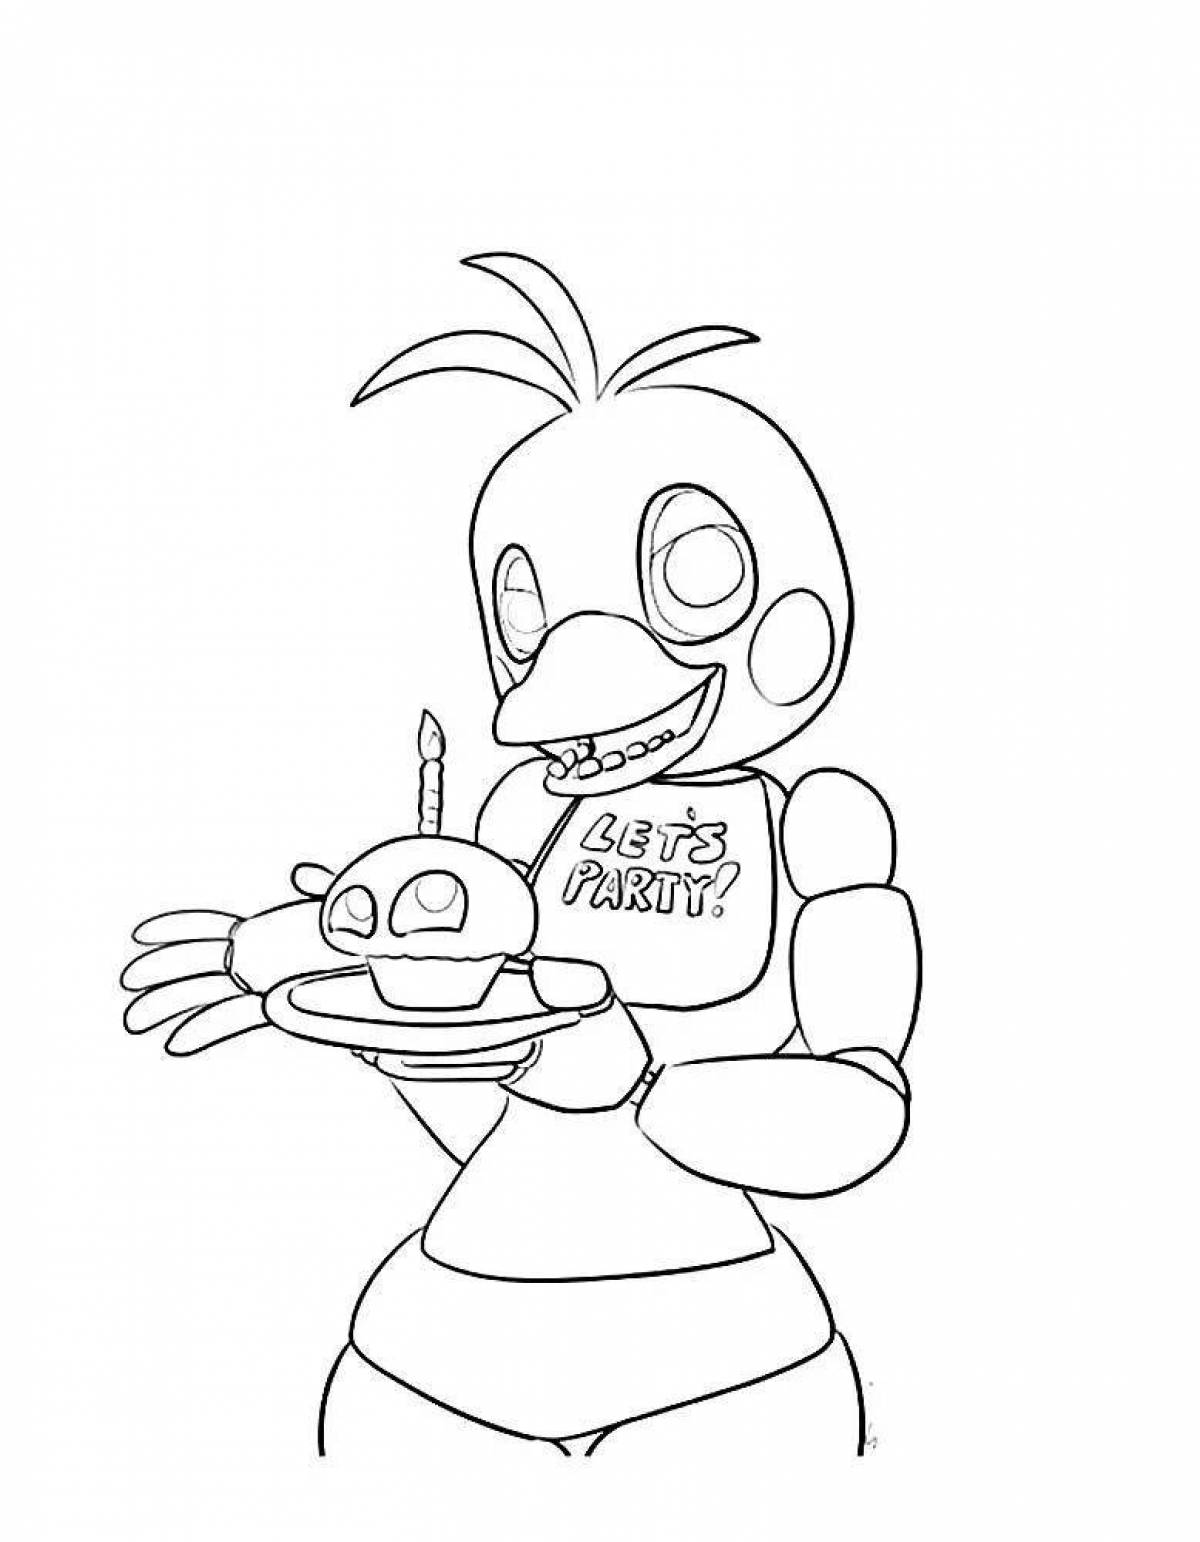 Bright chica fnaf 9 coloring book